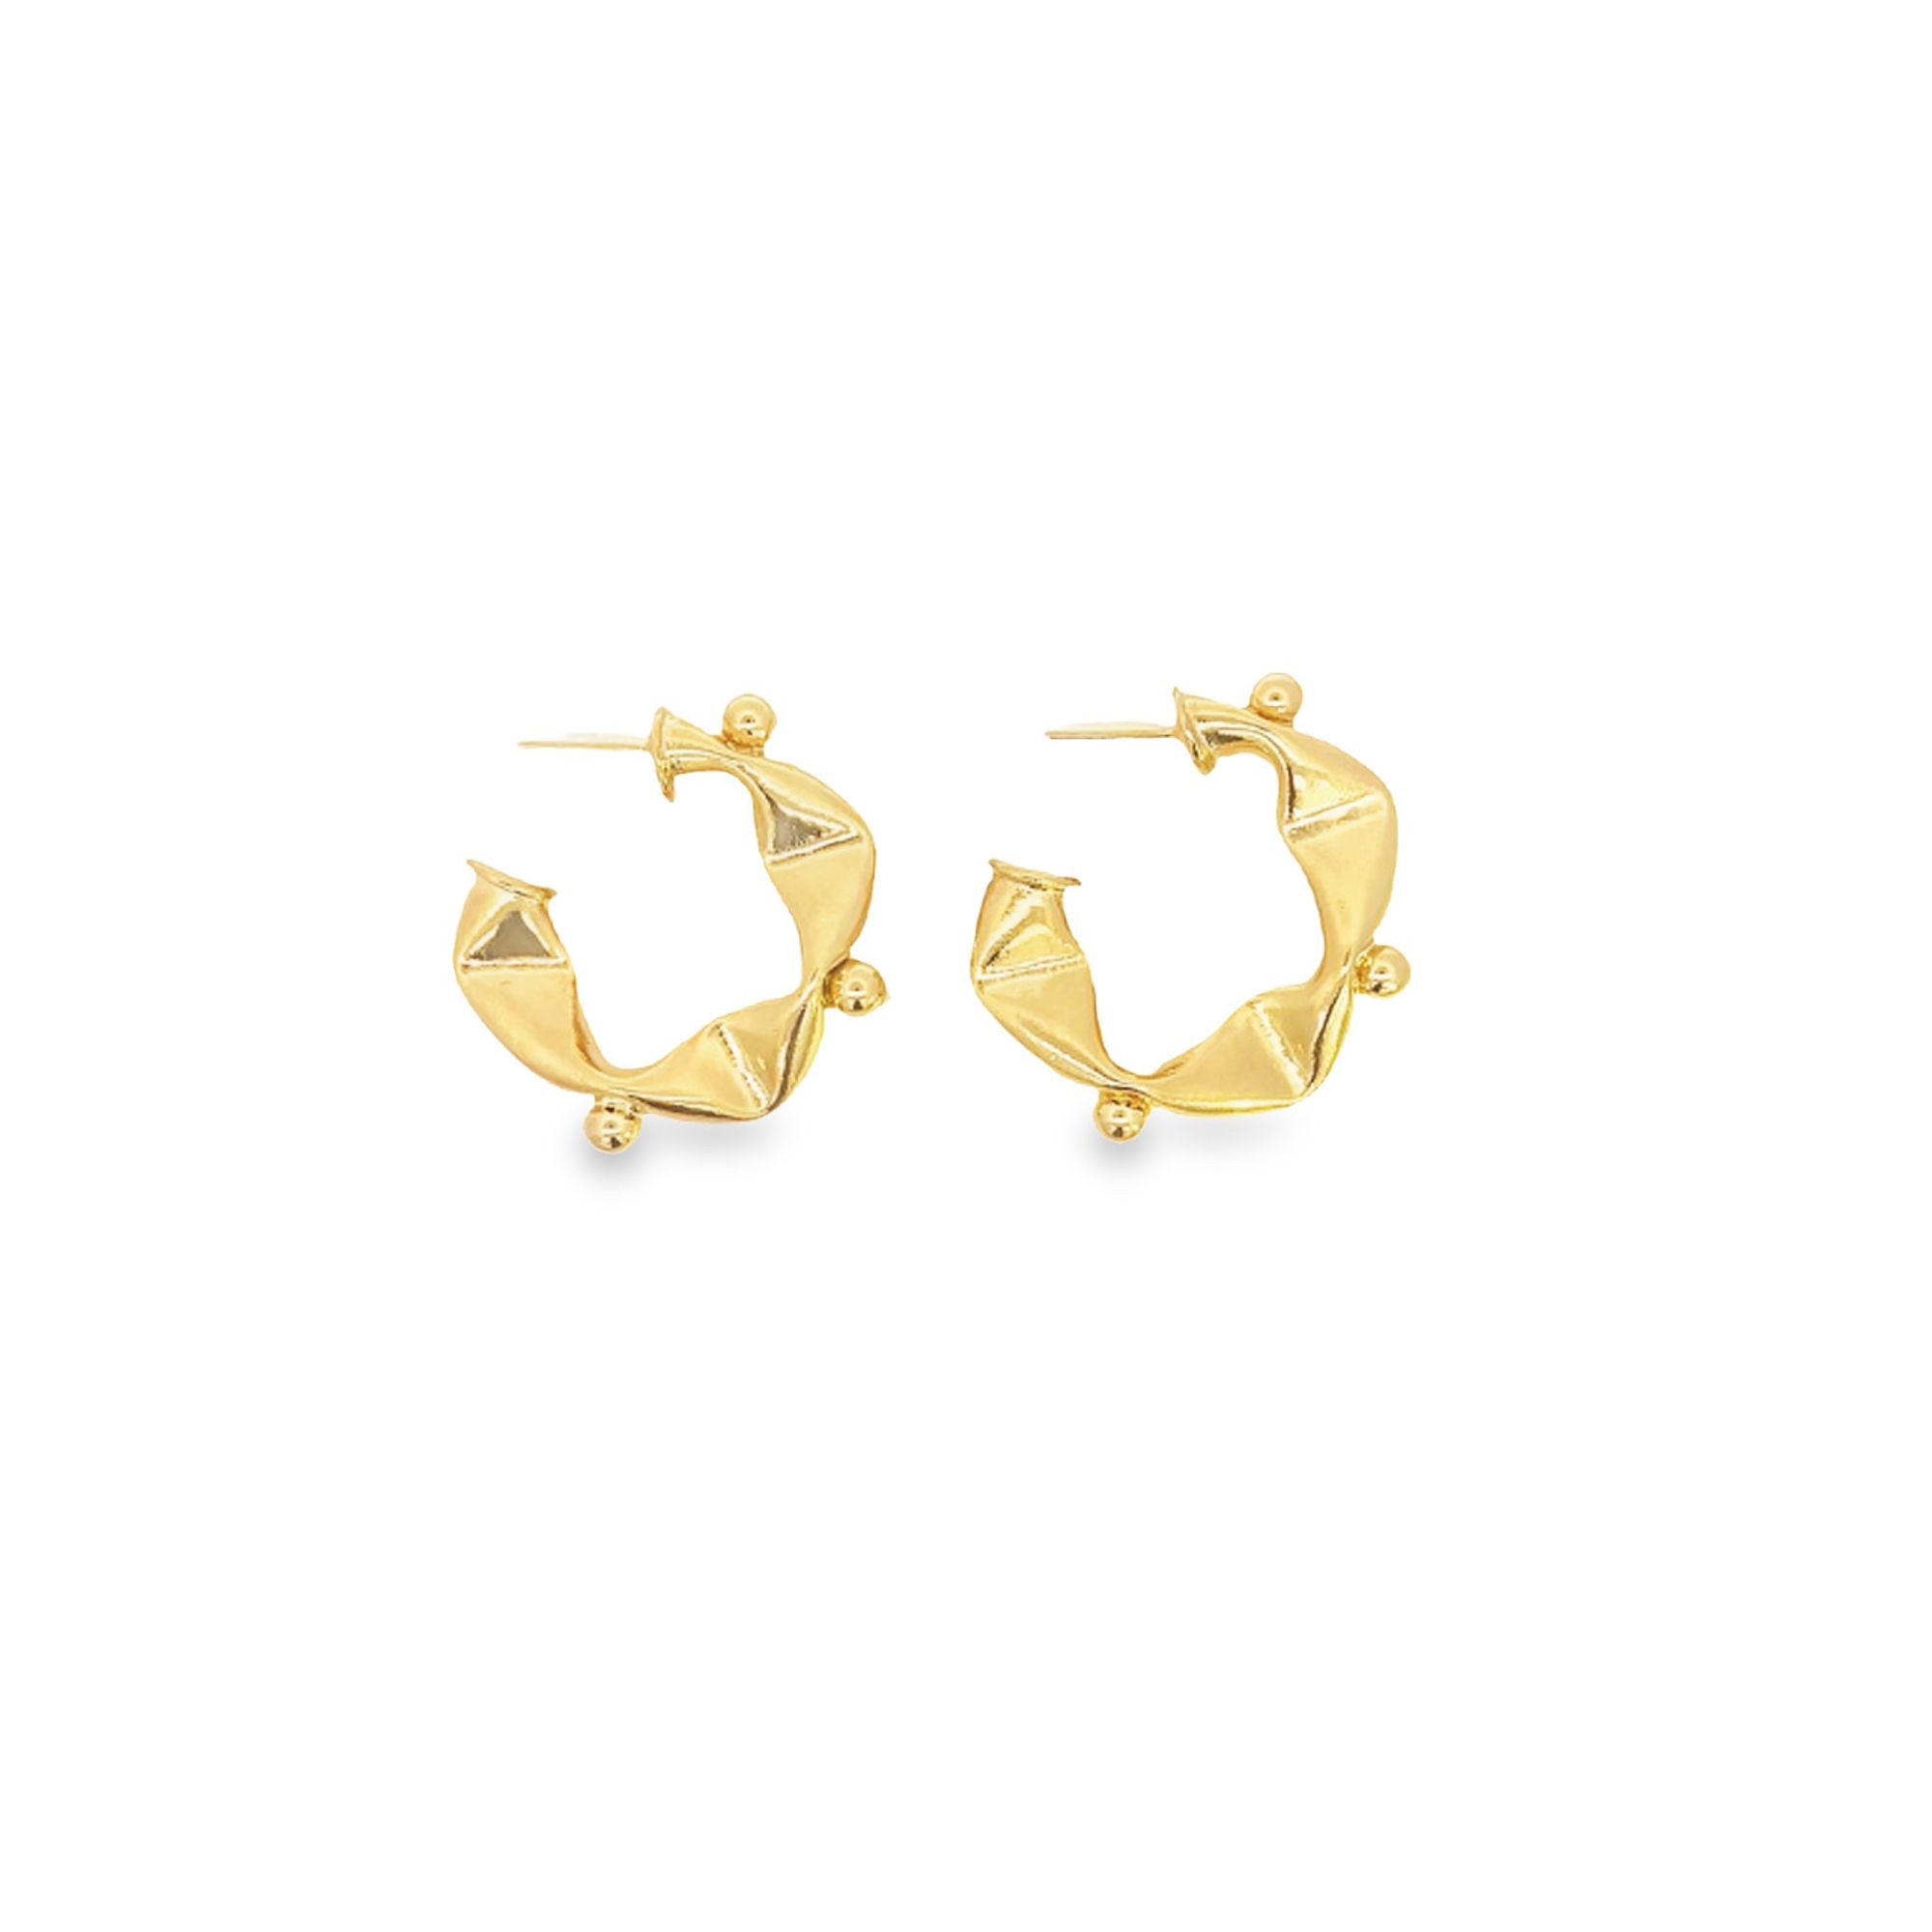 18K Gold Filled Square Abstract Styled Stud Earrings